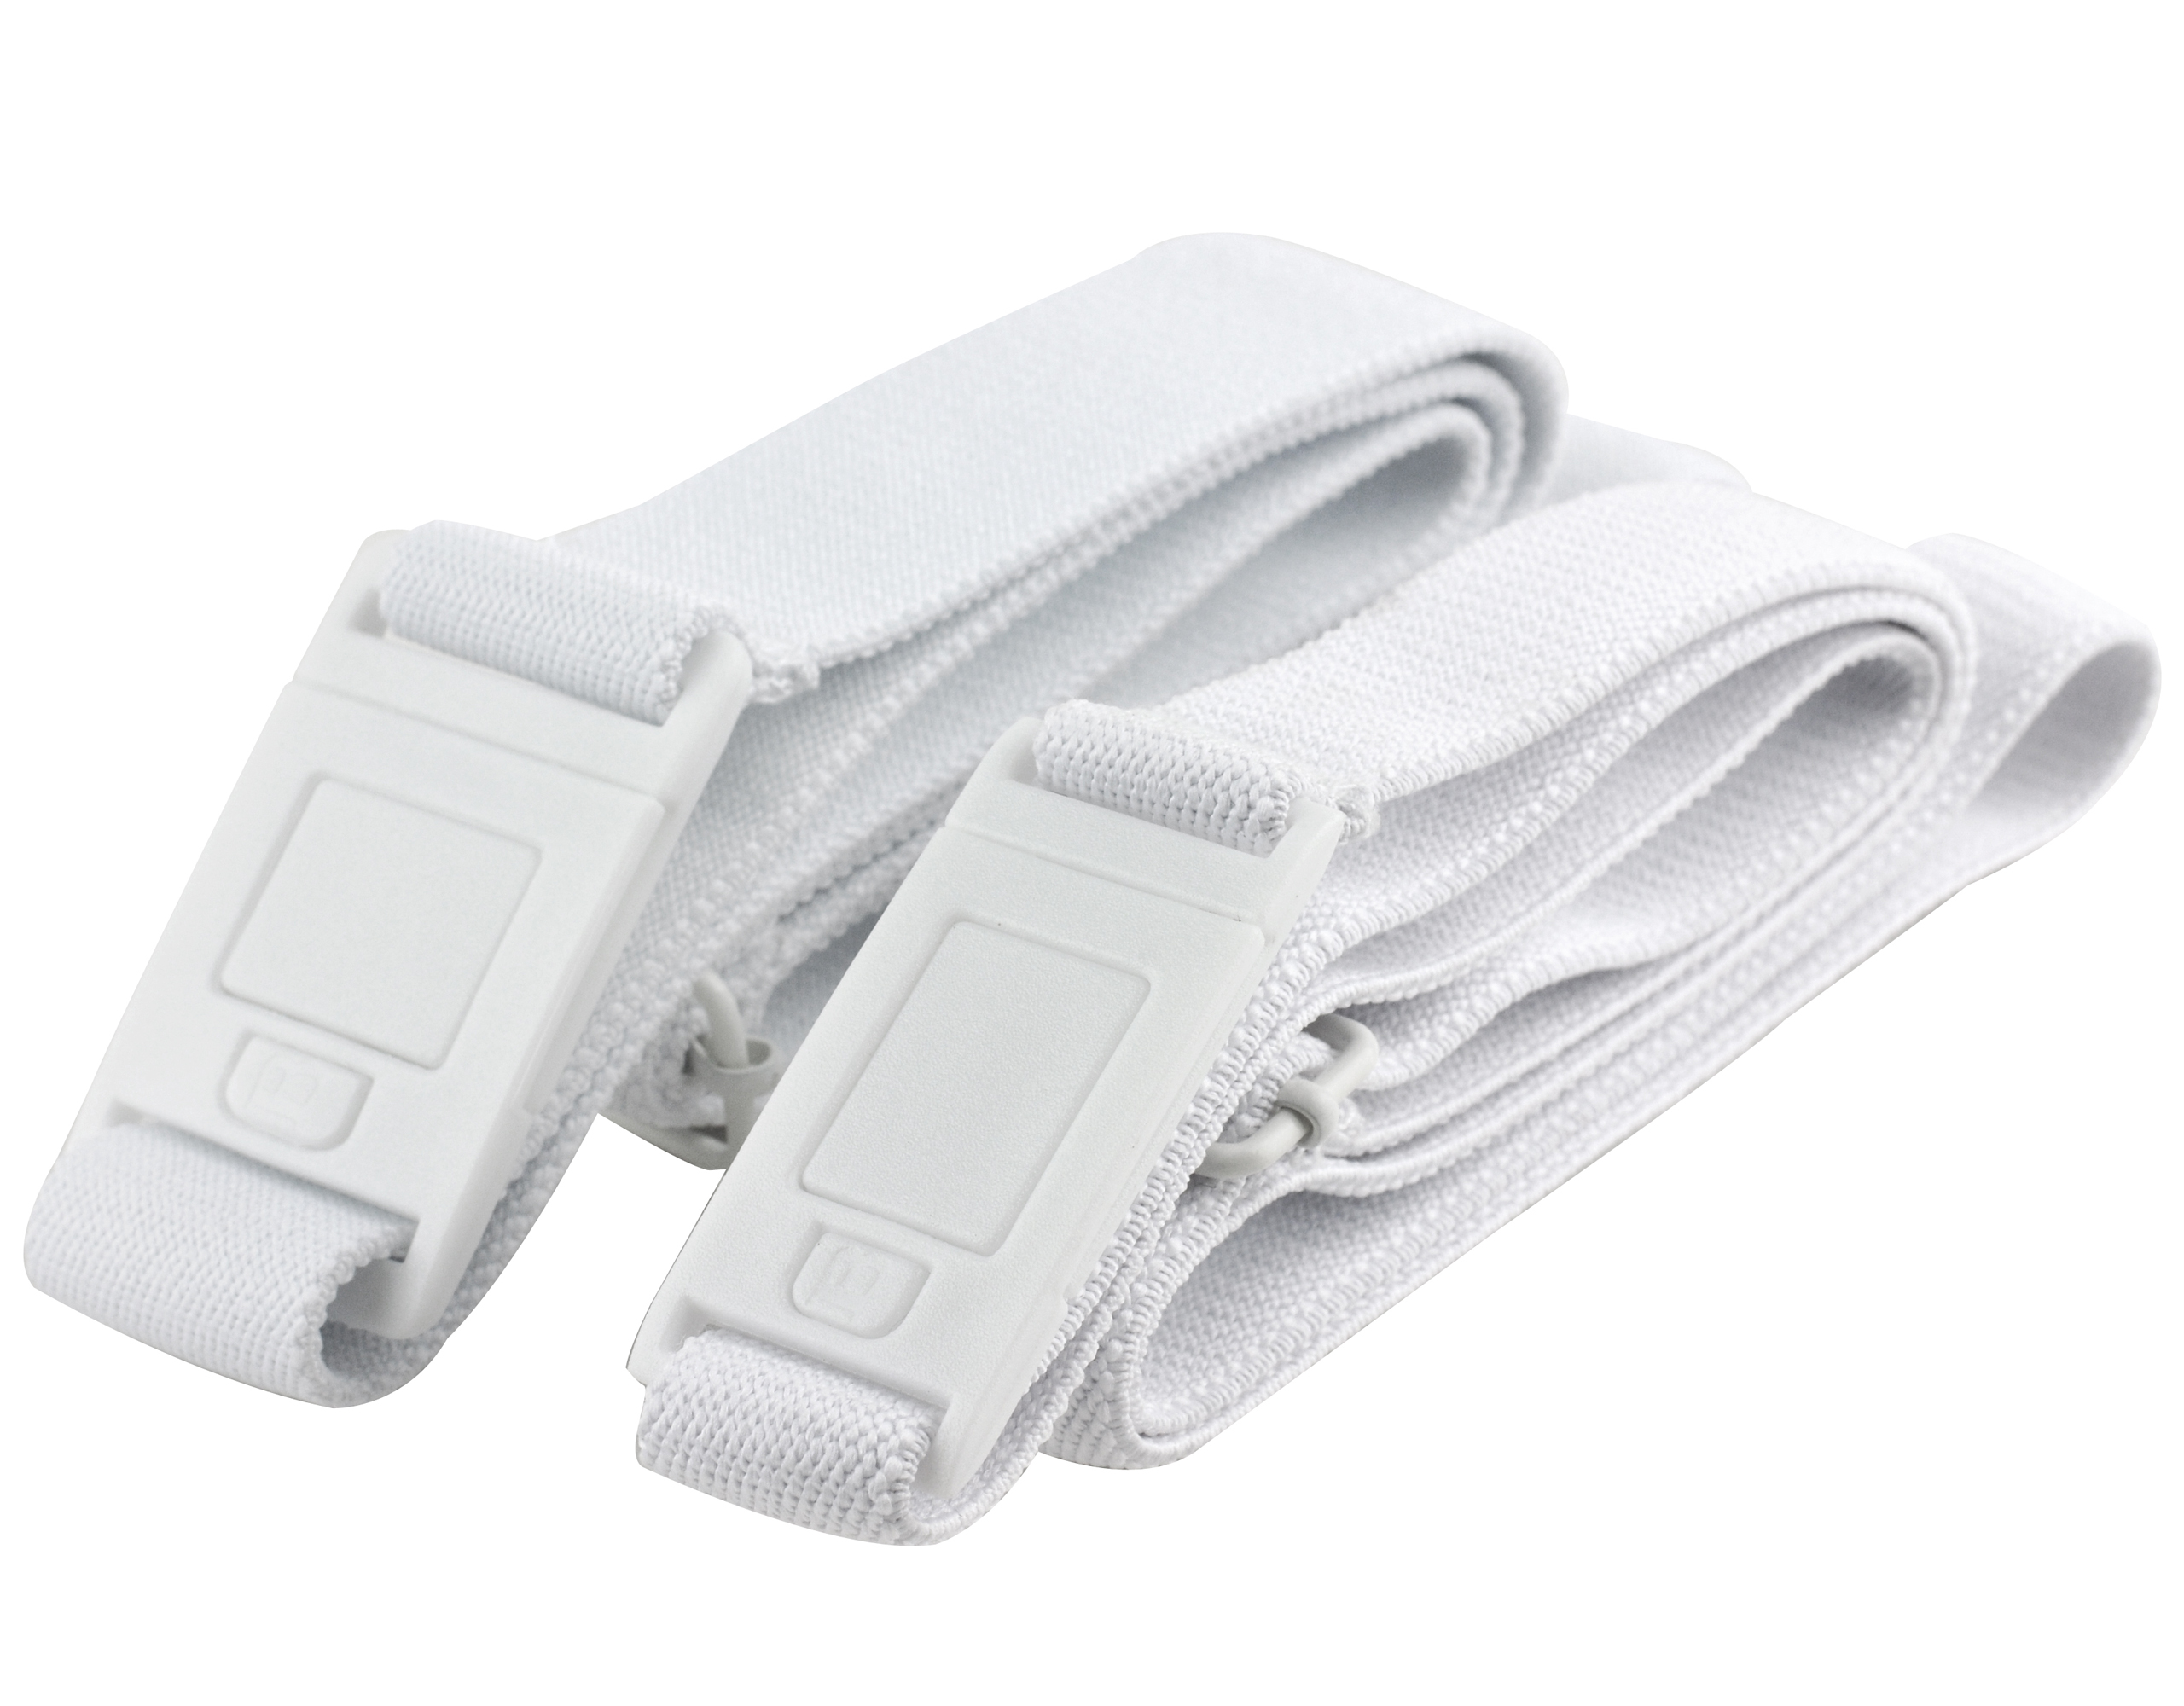 2 Belt Combo pack | Square and Narrow buckle designs | Beltaway